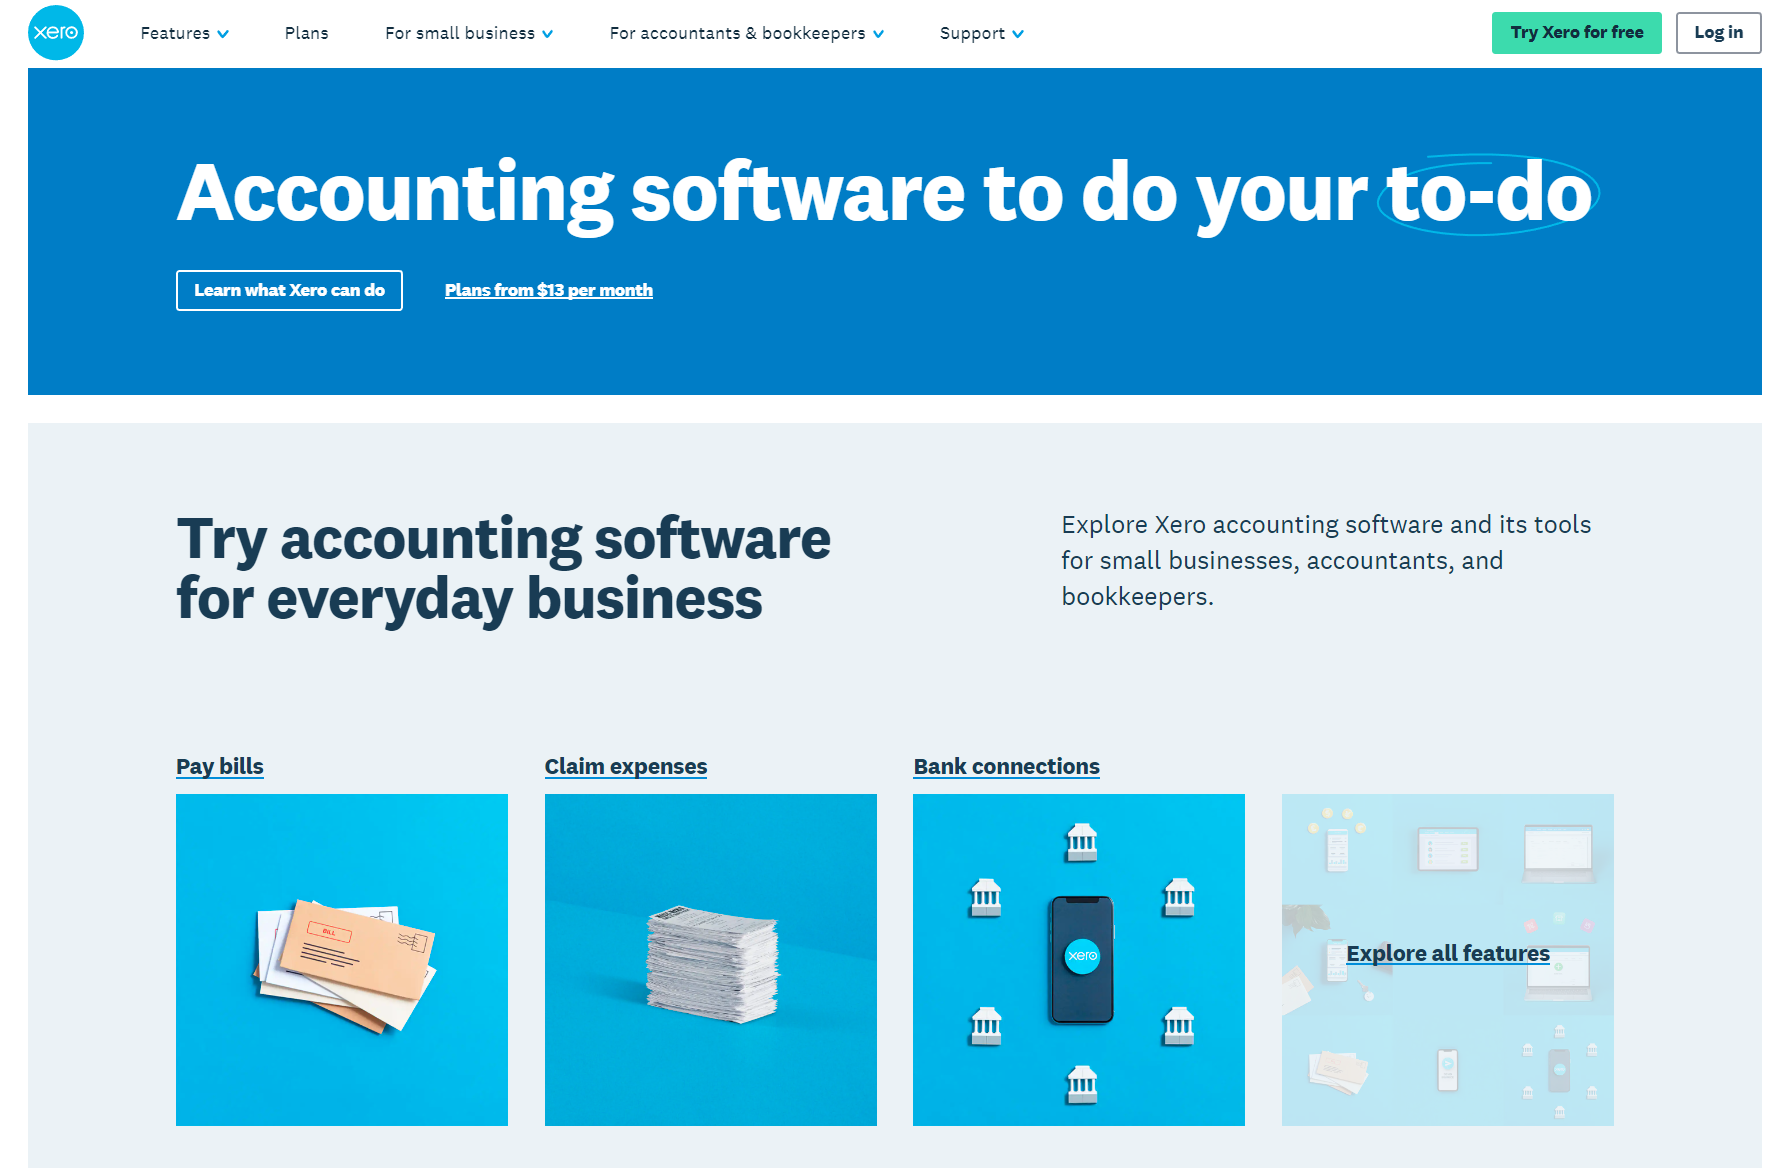 Image alt: Xero is an accountig software solution for everyday business.